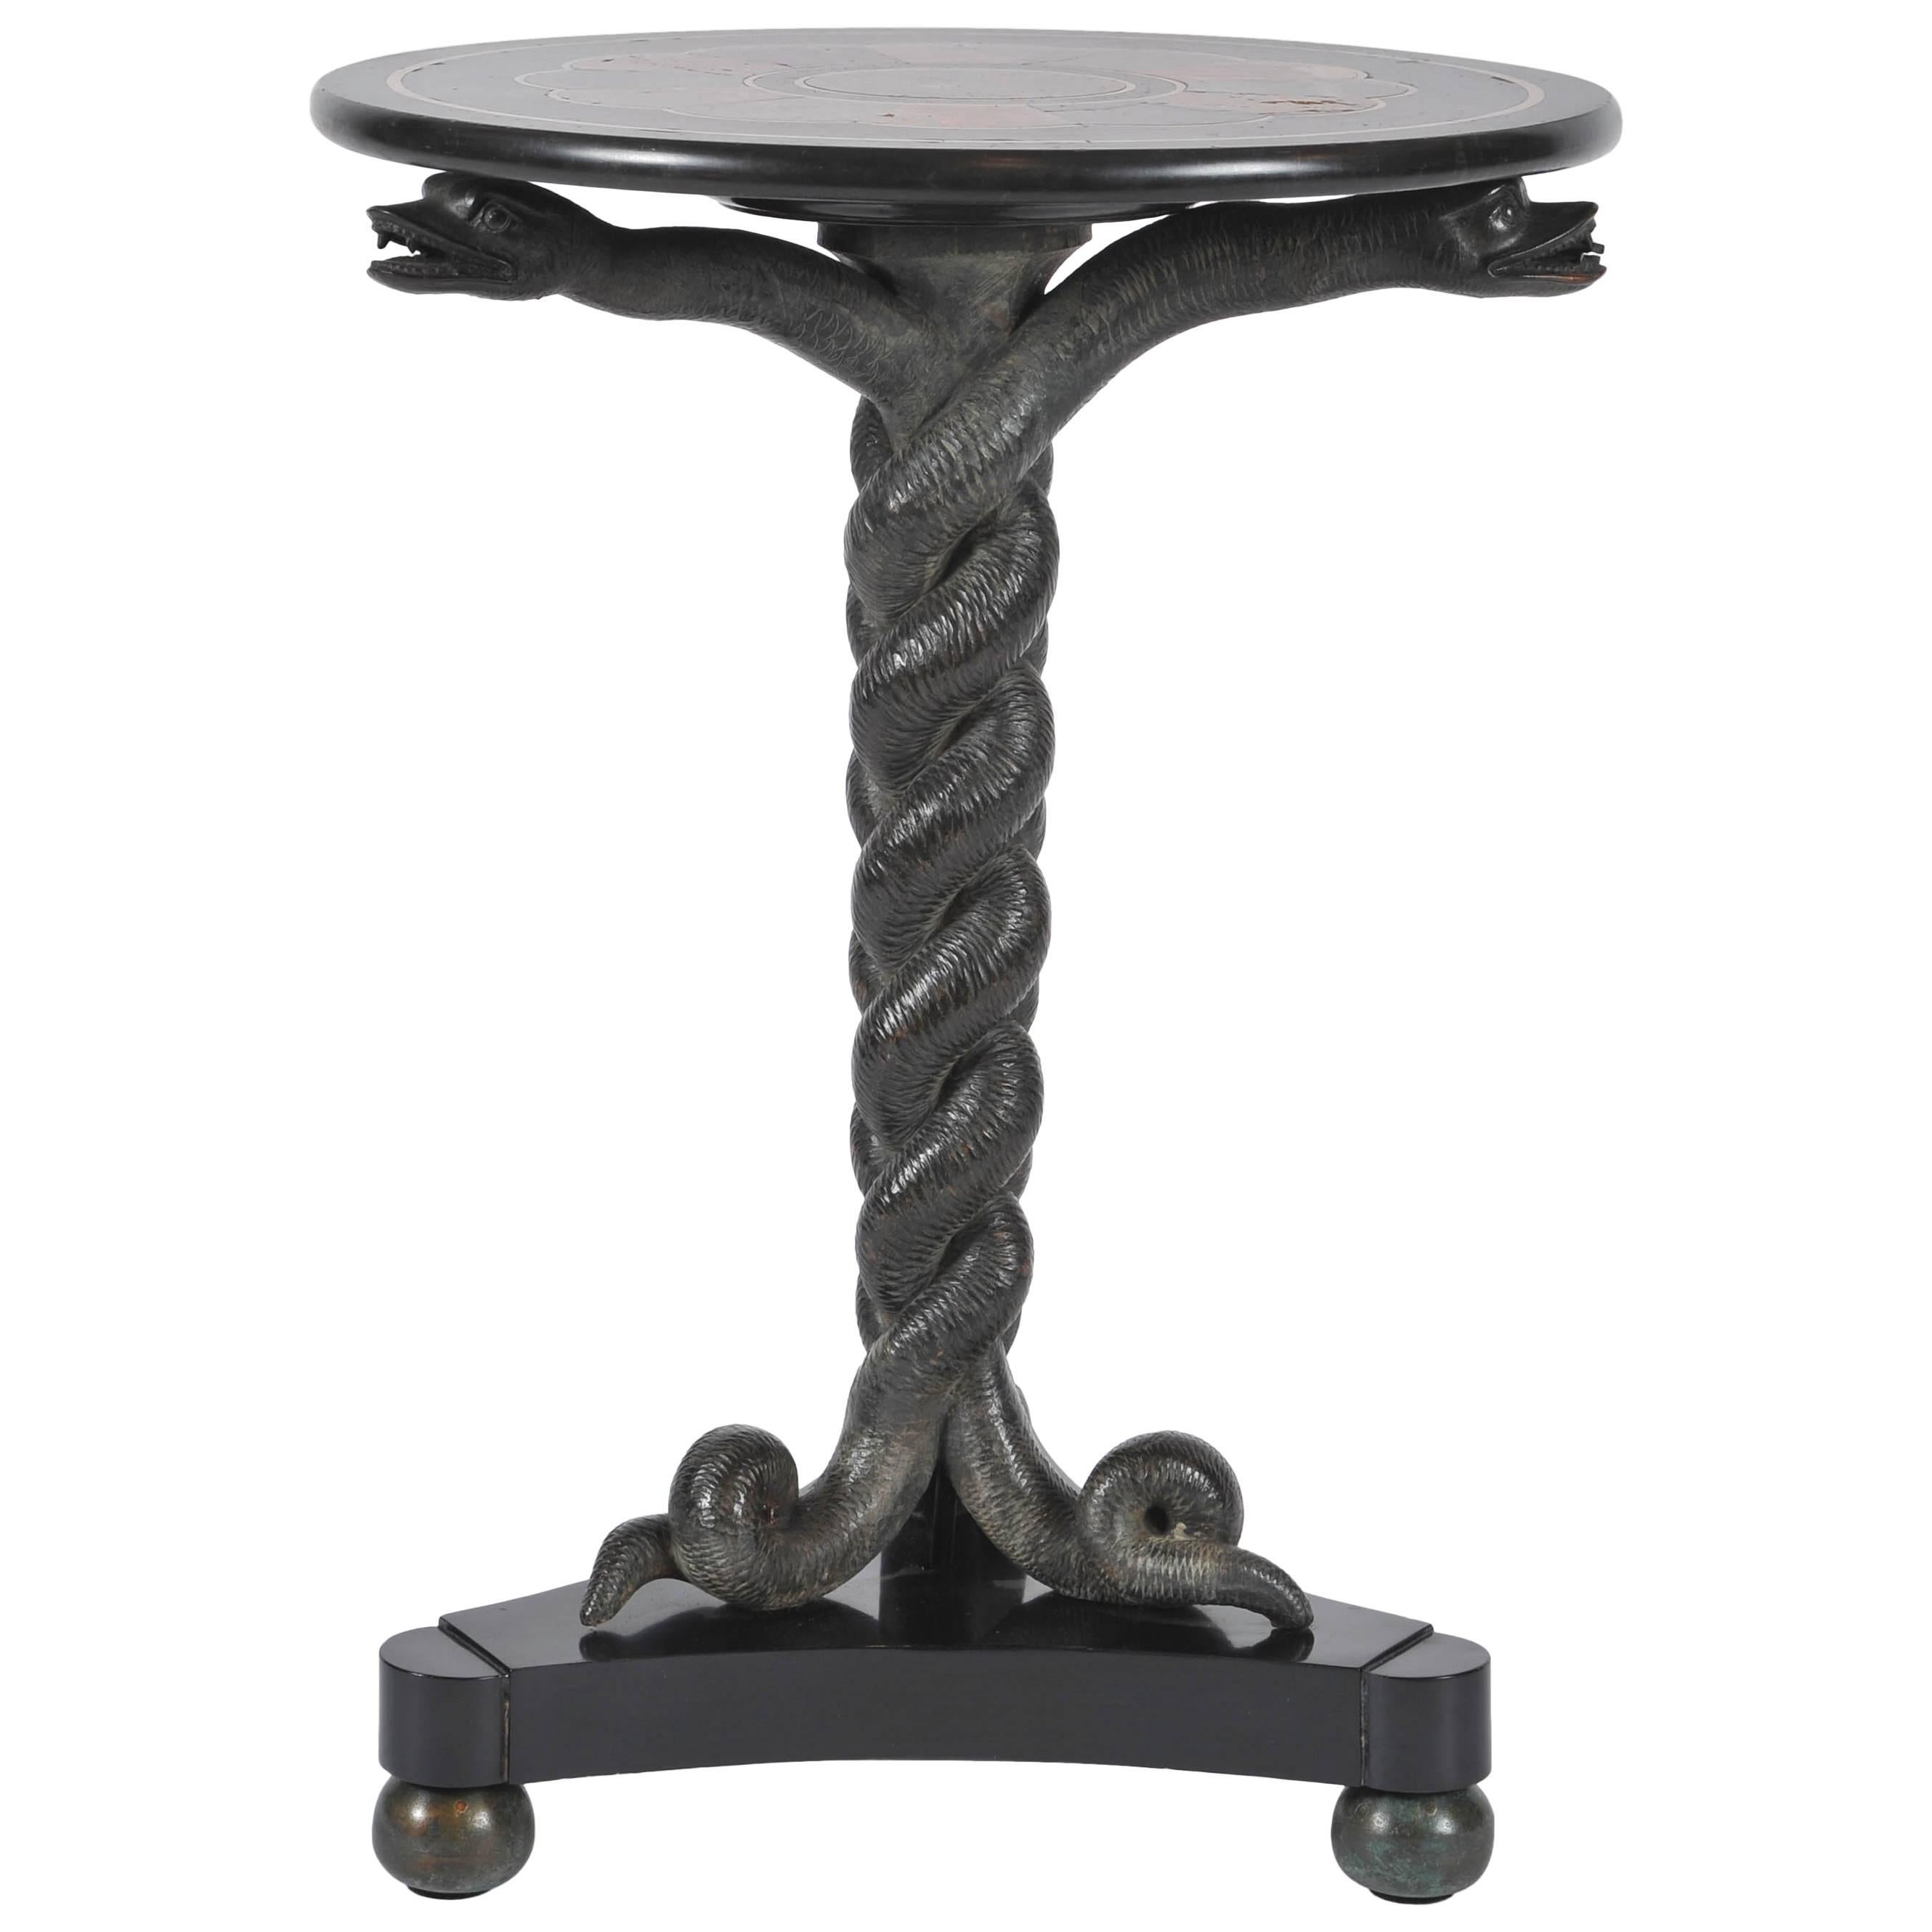 Regency Period Early 19th Century Marble-Top Table with Serpent Support For Sale